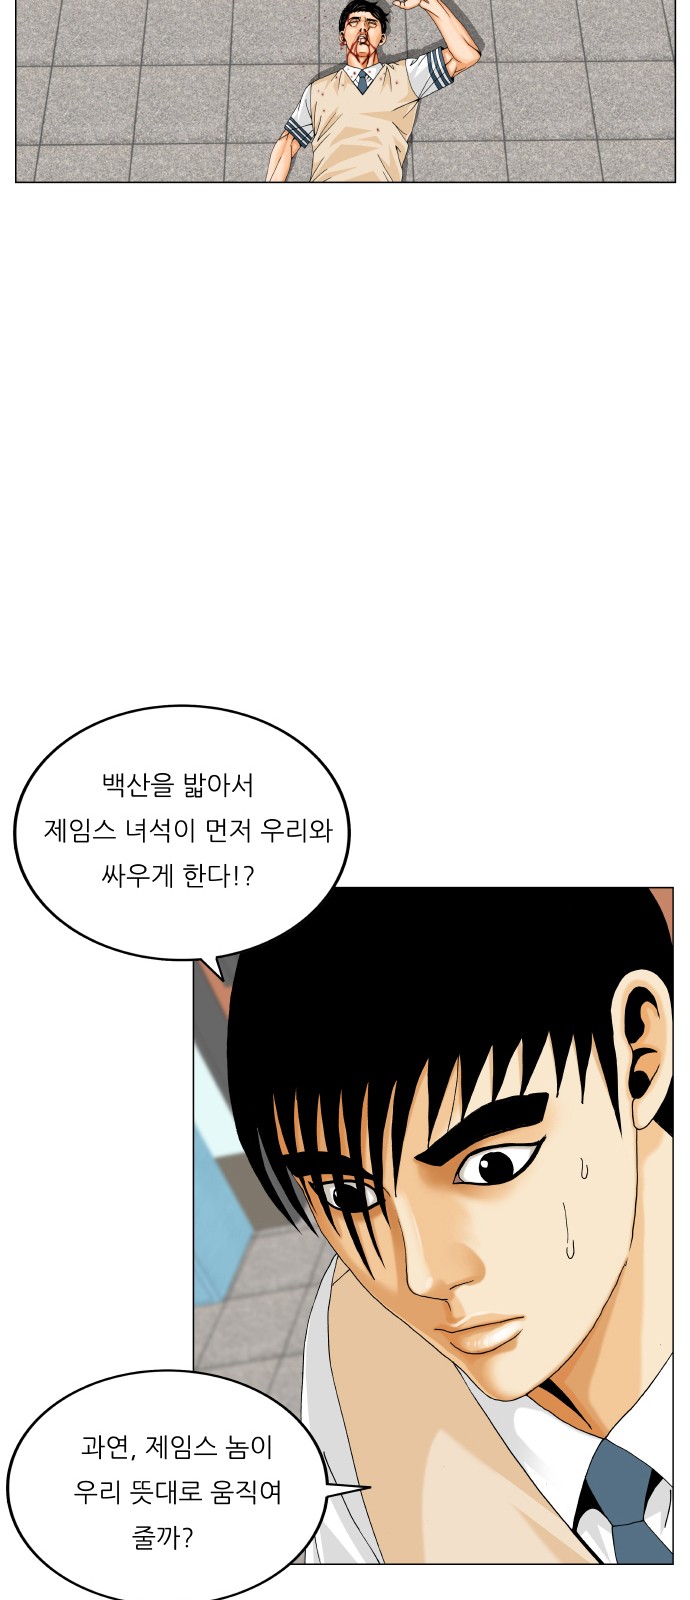 Ultimate Legend - Kang Hae Hyo - Chapter 476 - Page 2